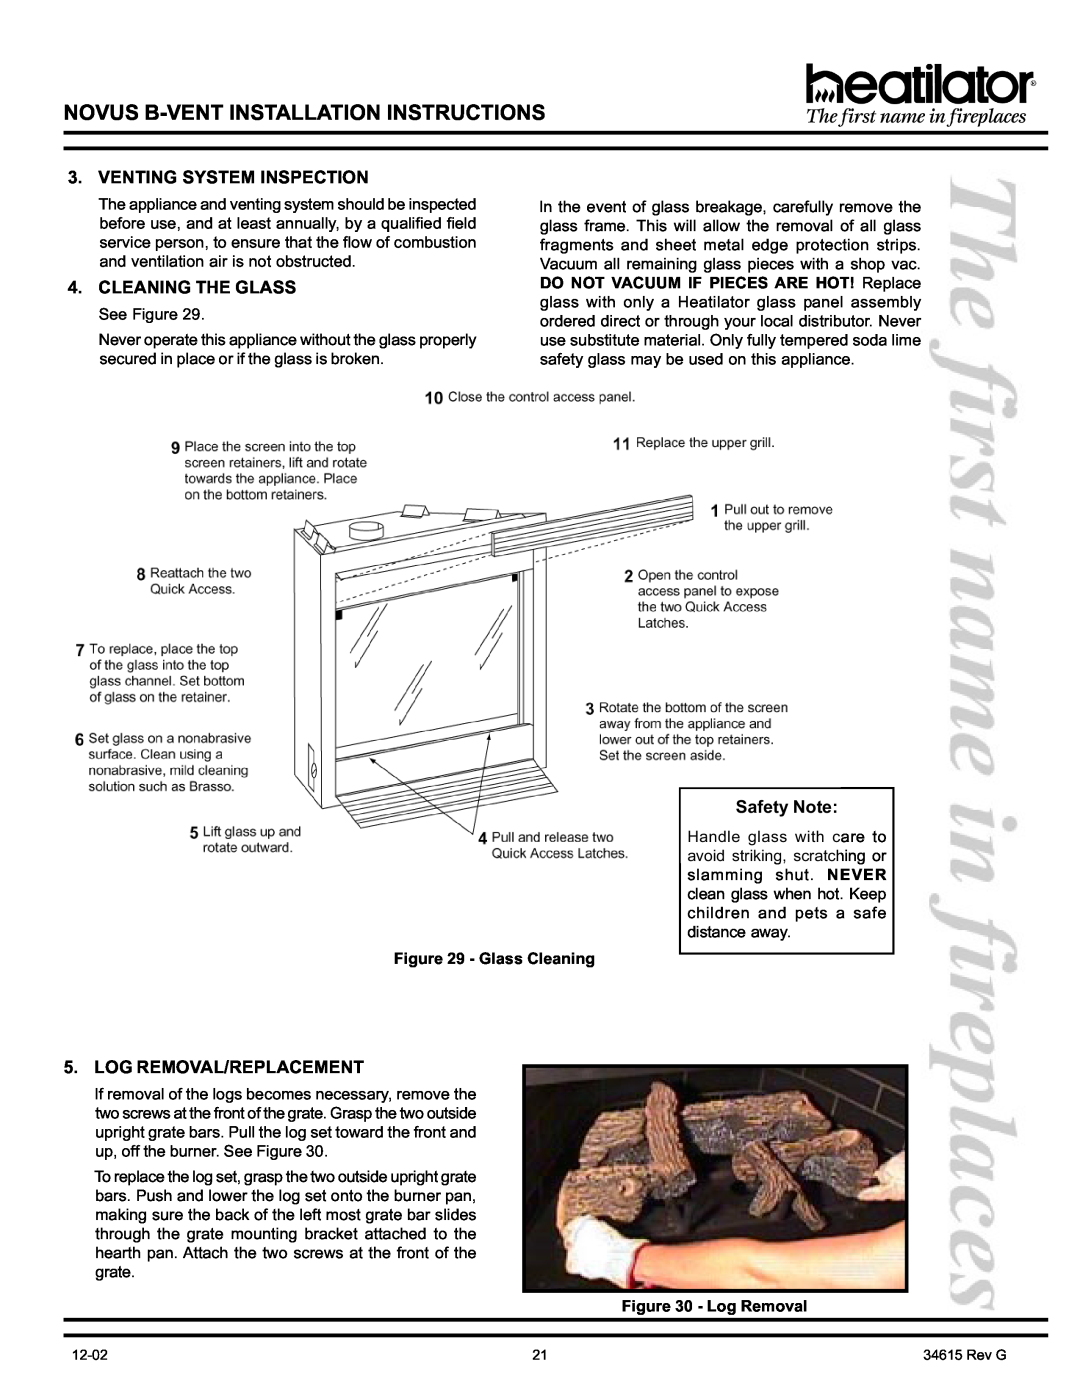 Hearth and Home Technologies GNBC30 Venting System Inspection, Cleaning The Glass, Safety Note, Log Removal/Replacement 